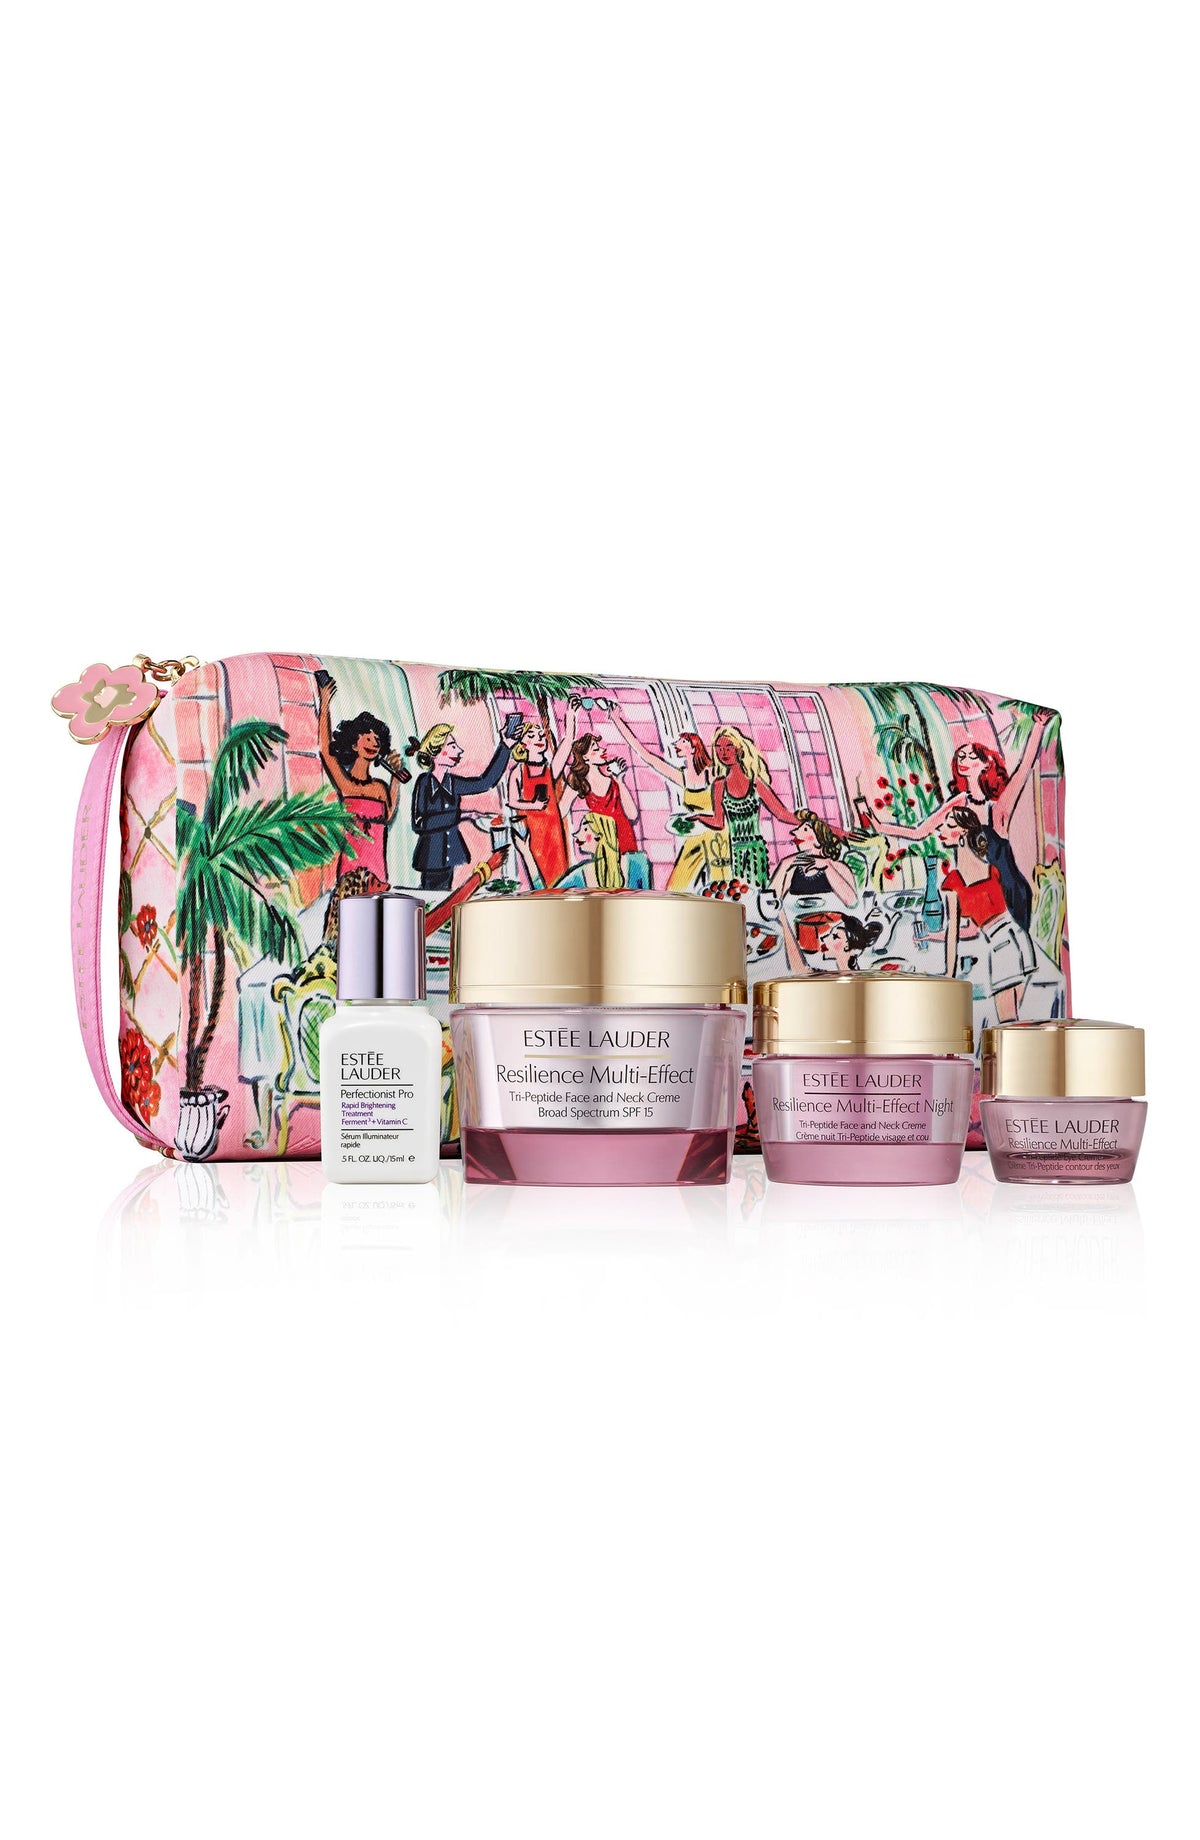 Estee Lauder Resilience Multi-Effect RADIANCE Routine Set - Limited Edition - (Value $228)